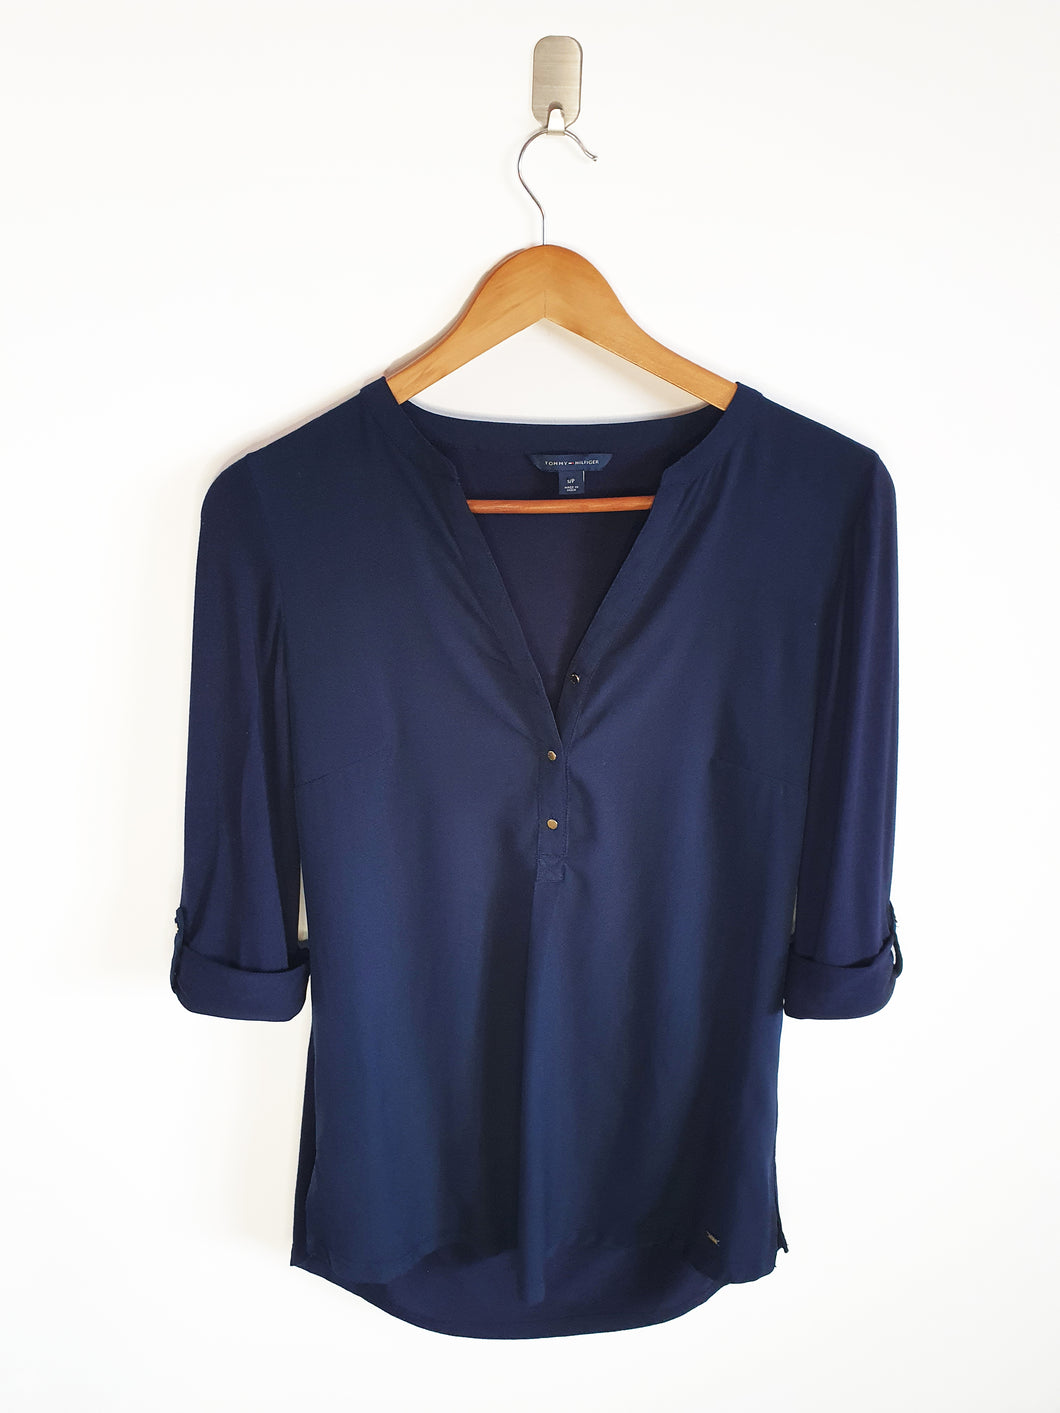 Tommy Hilfiger Womens Navy Blouse - S